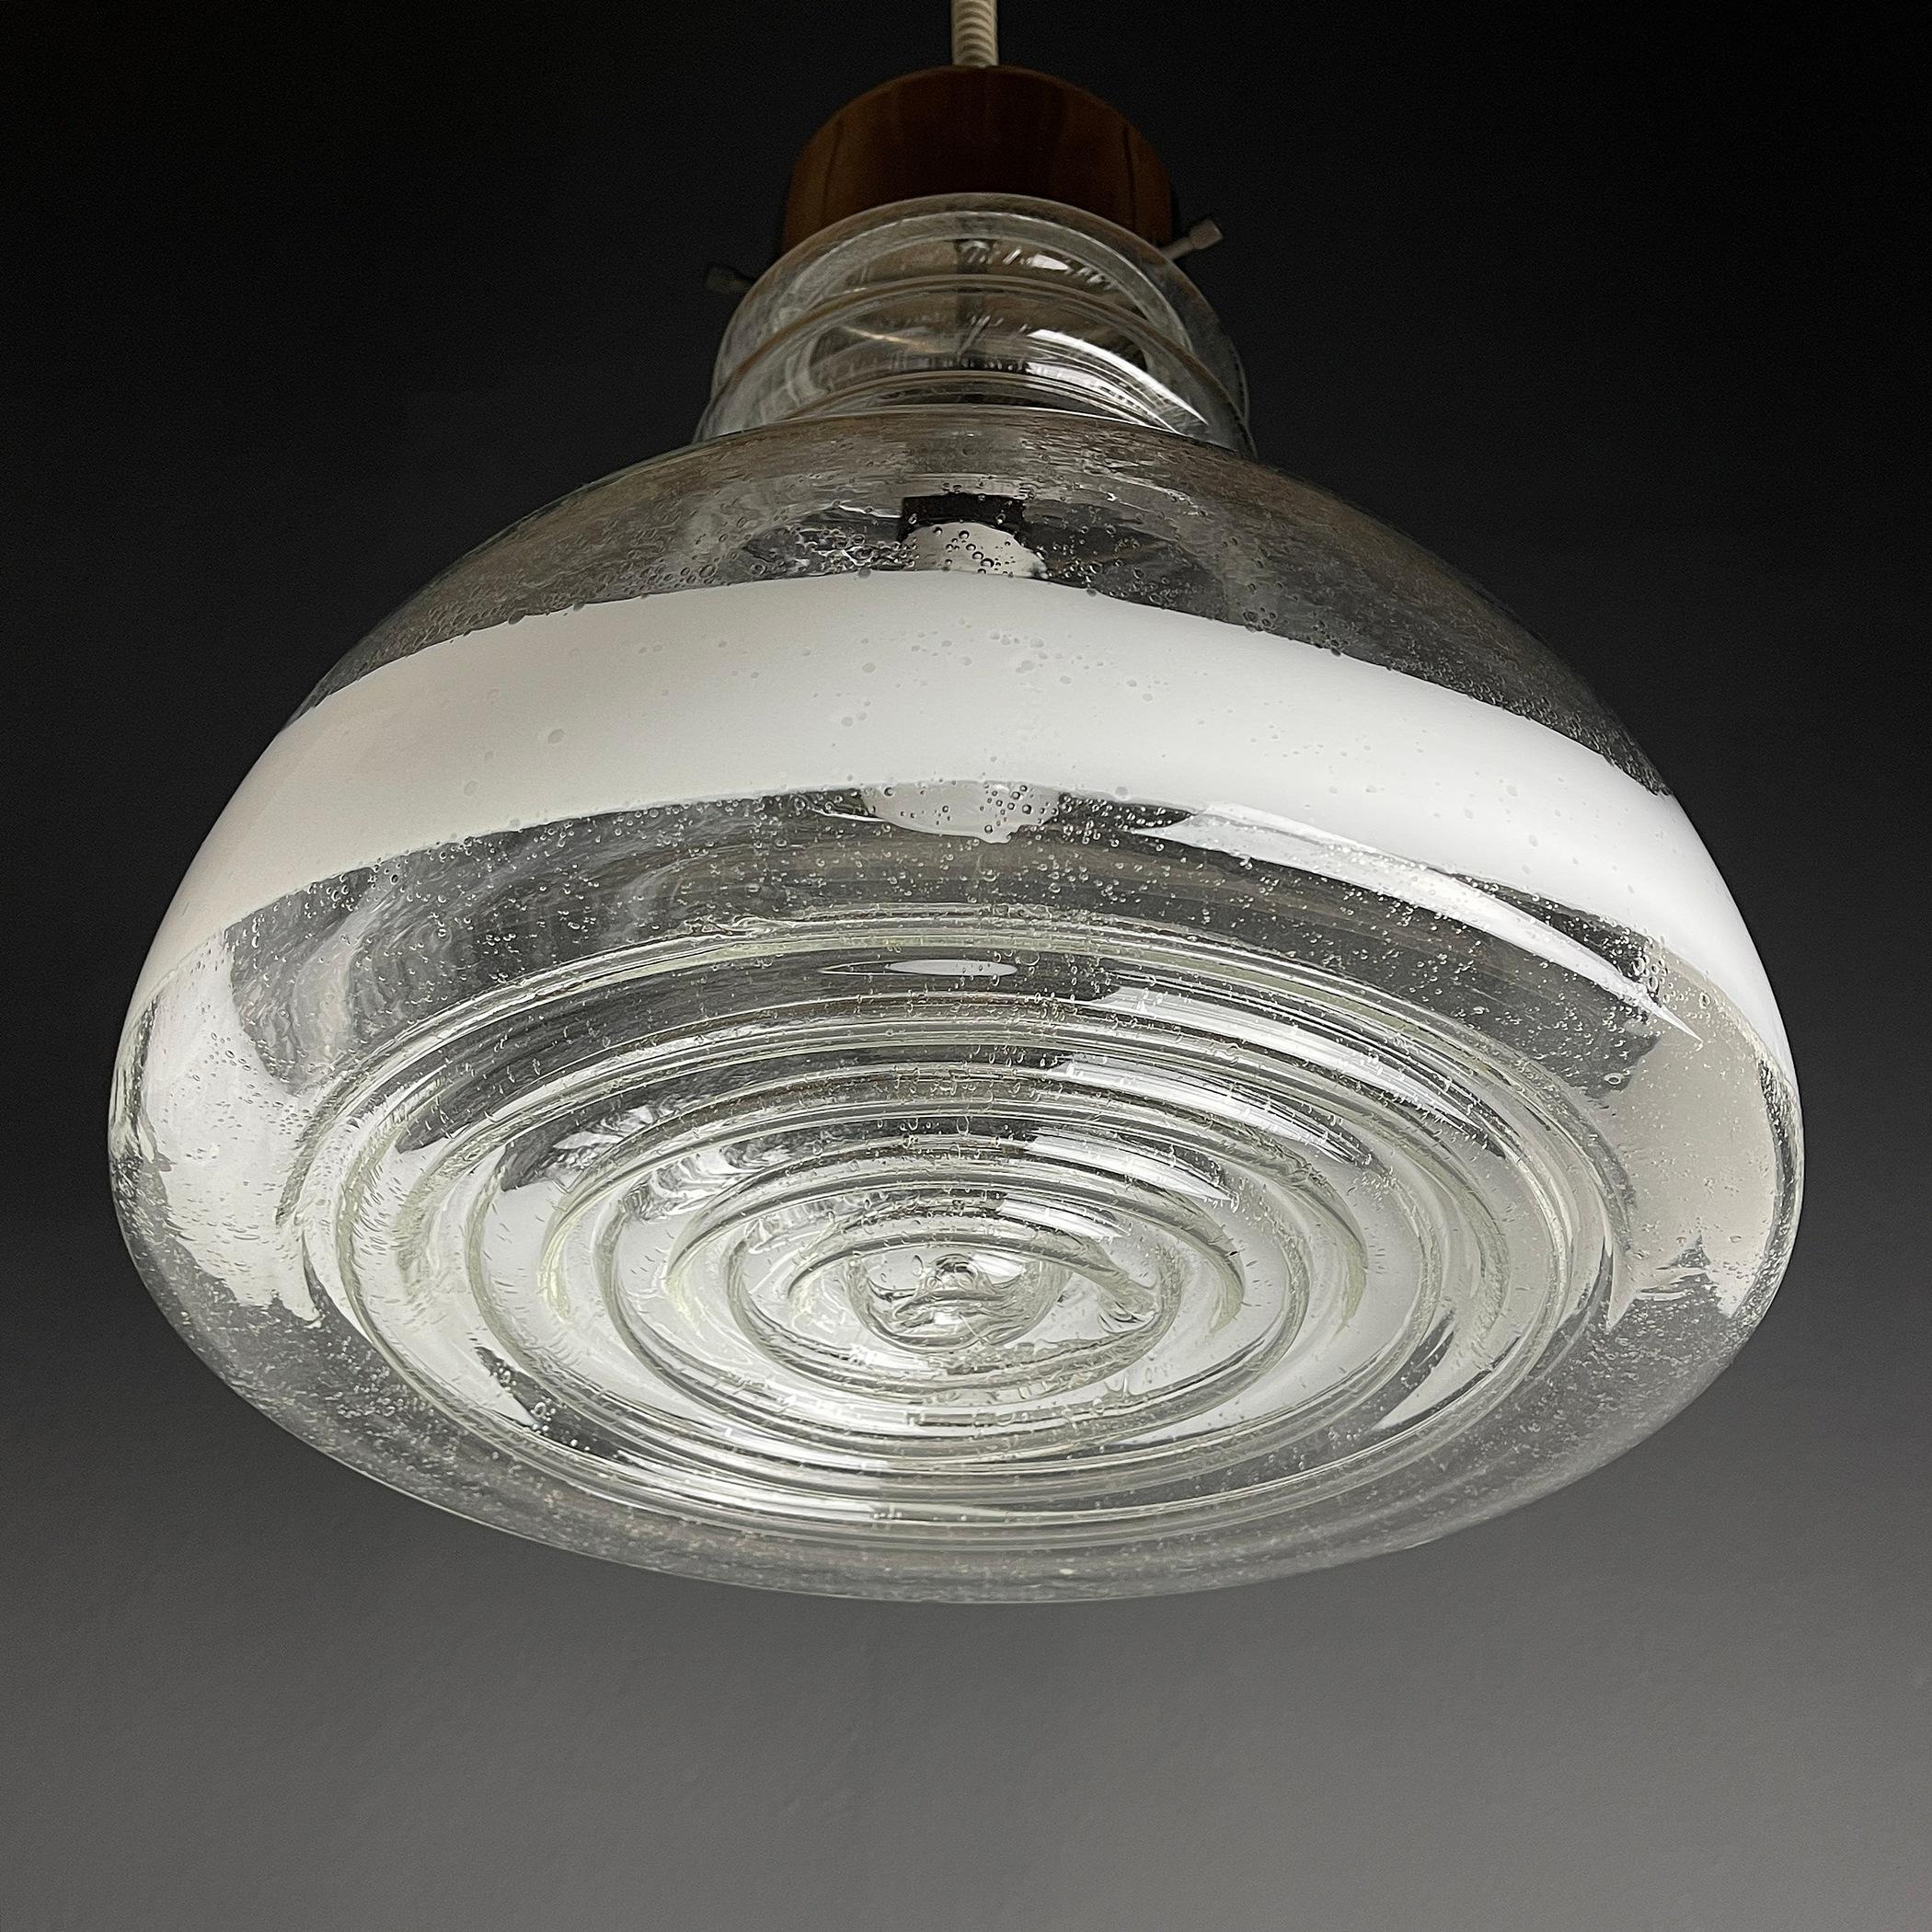 The rare large hand-blown Murano glass pendant lampa made in Italy in the 1960s. A transparent glass shade with a 